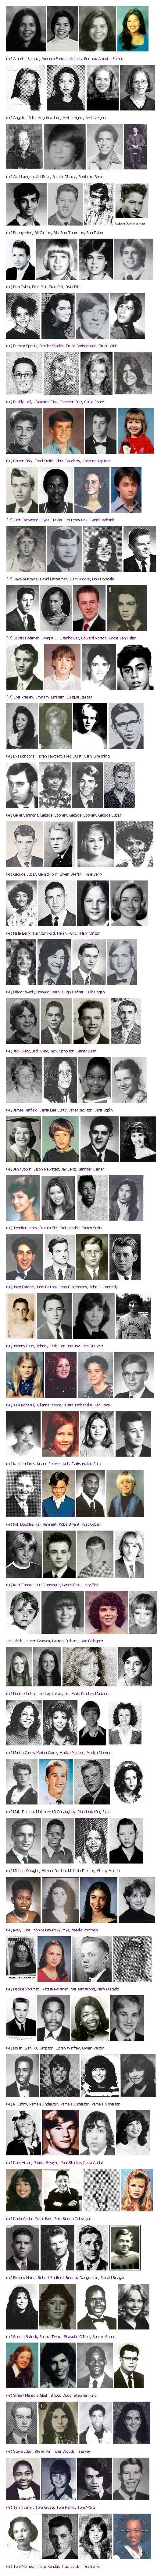 Famous people's year book photo's